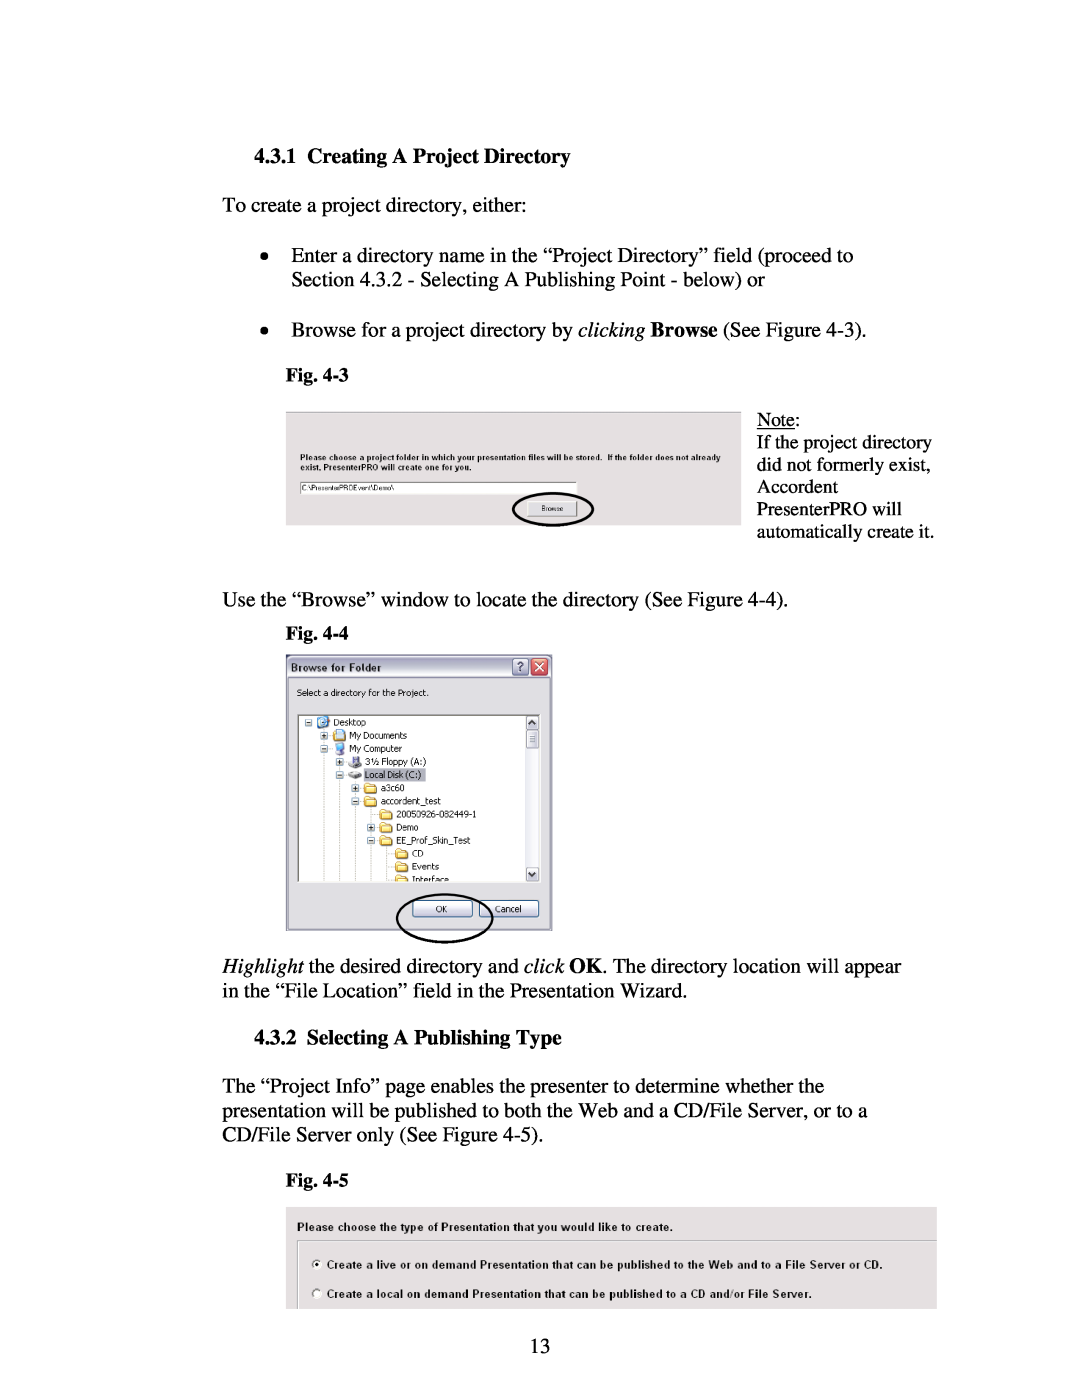 Polycom 6.1 user manual Creating A Project Directory, Selecting A Publishing Type 